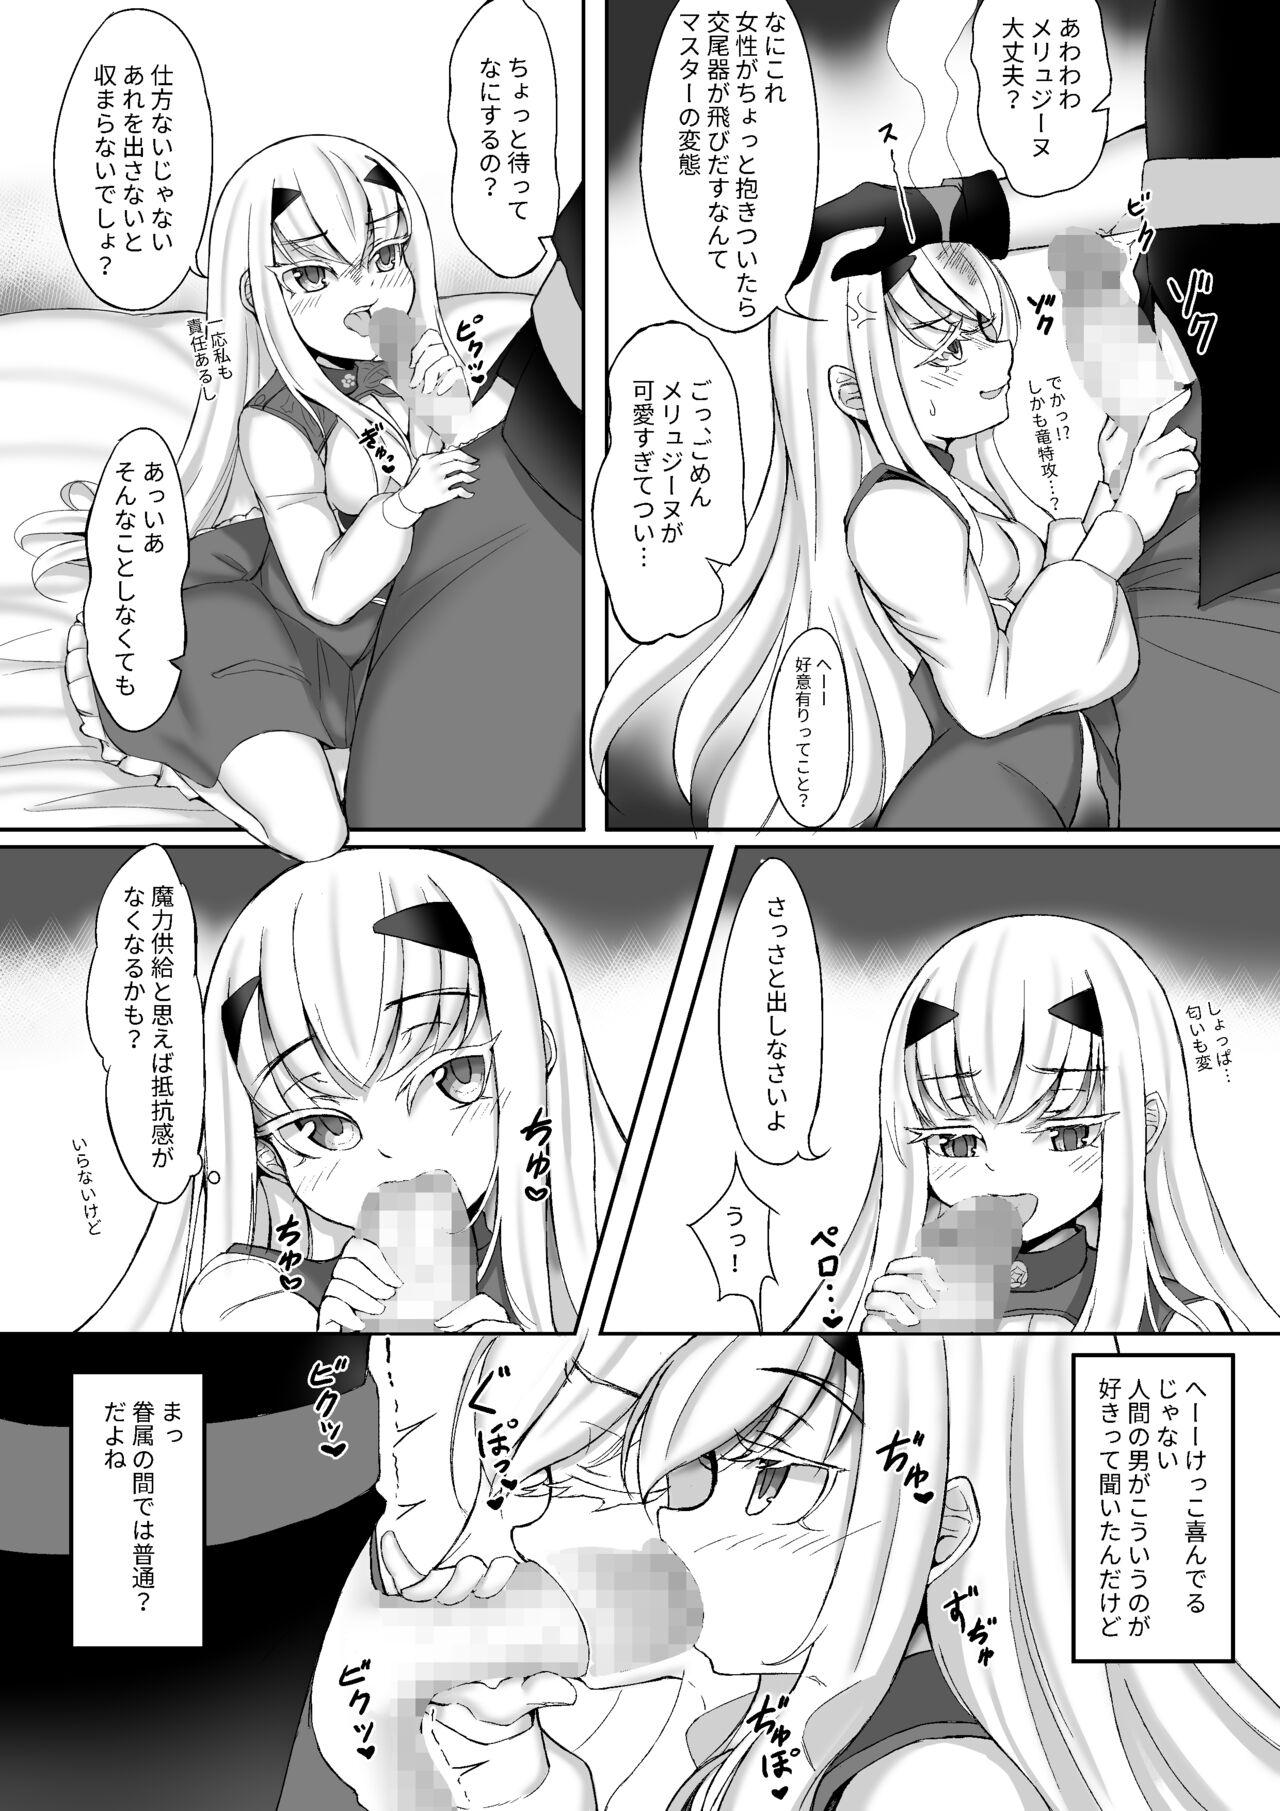 Pounded FujiMelu Maryoku Kyoukyuu Love One Another - Fate grand order Stockings - Page 9